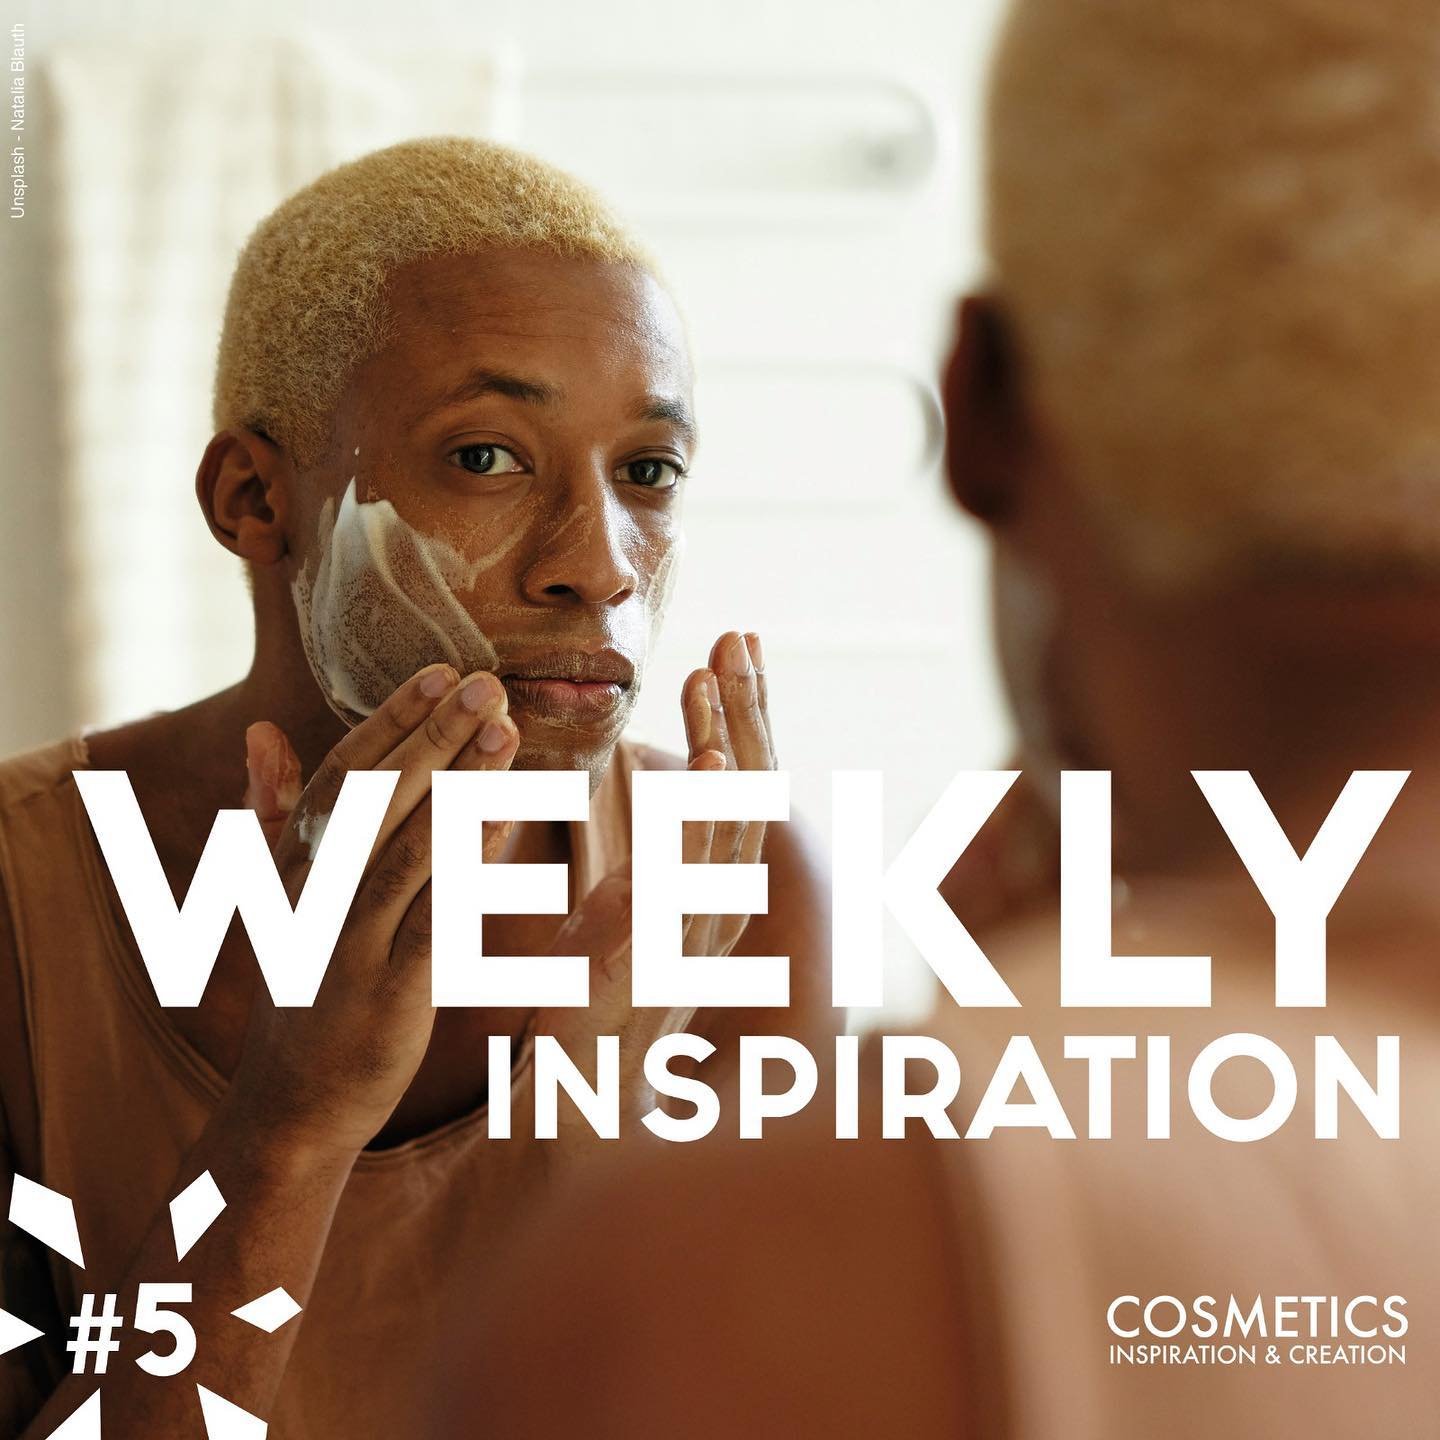 Weekly Inspiration #5 - a curation of beauty, fashion and retails news. Find us on Twitter, Linkedin &amp; TikTok to be updated on all the inspiring news.

The Ordinary recently launched a campaign on British streets, cautioning teenagers: &laquo;&nb